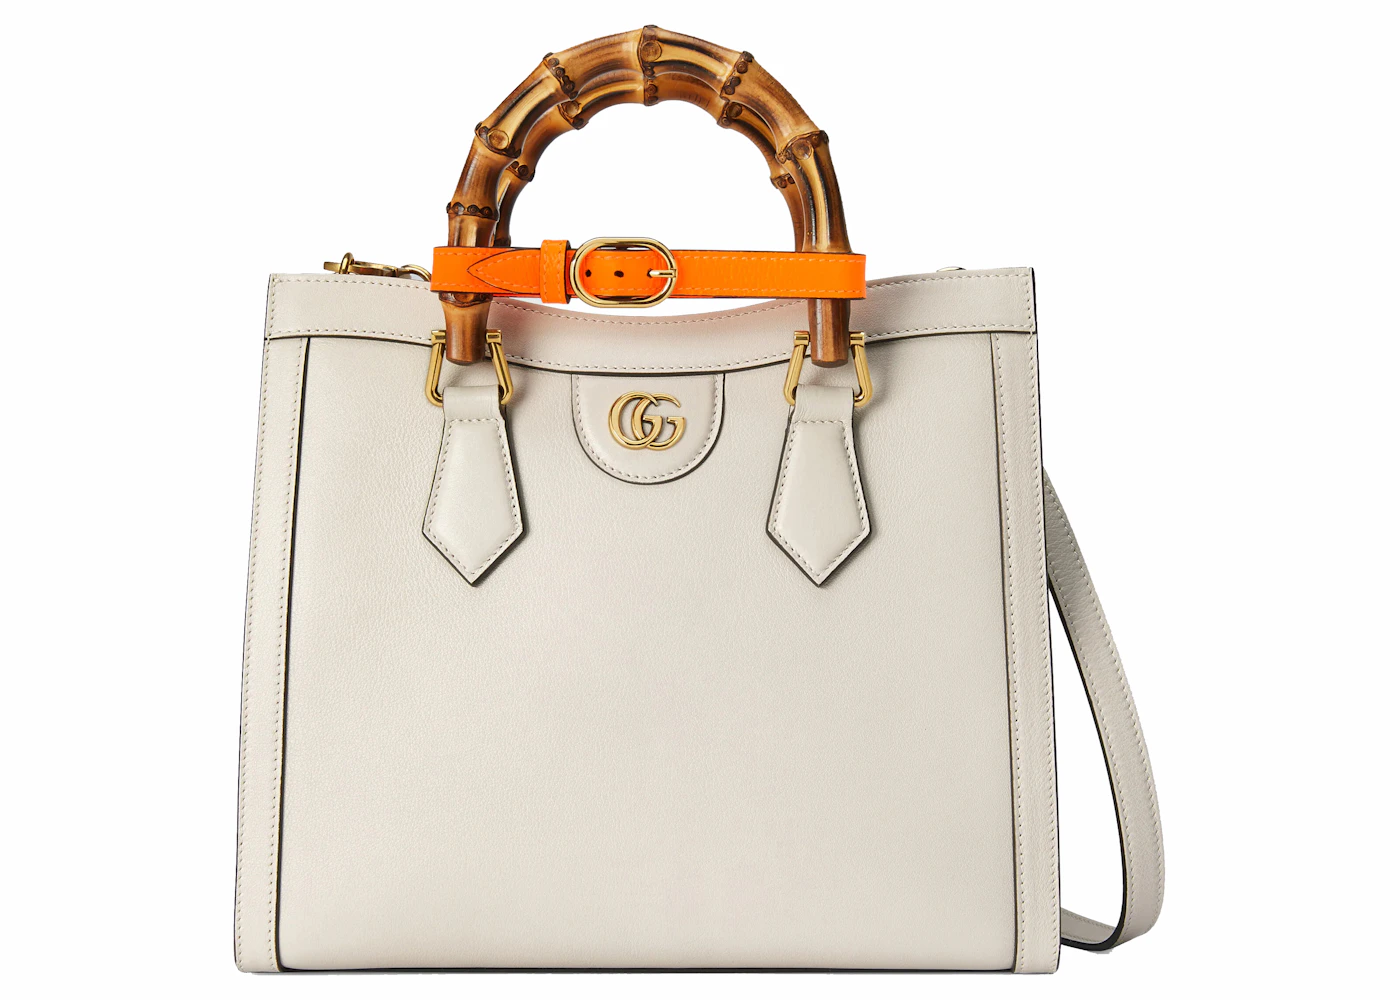 Gucci Diana small tote bag in beige leather